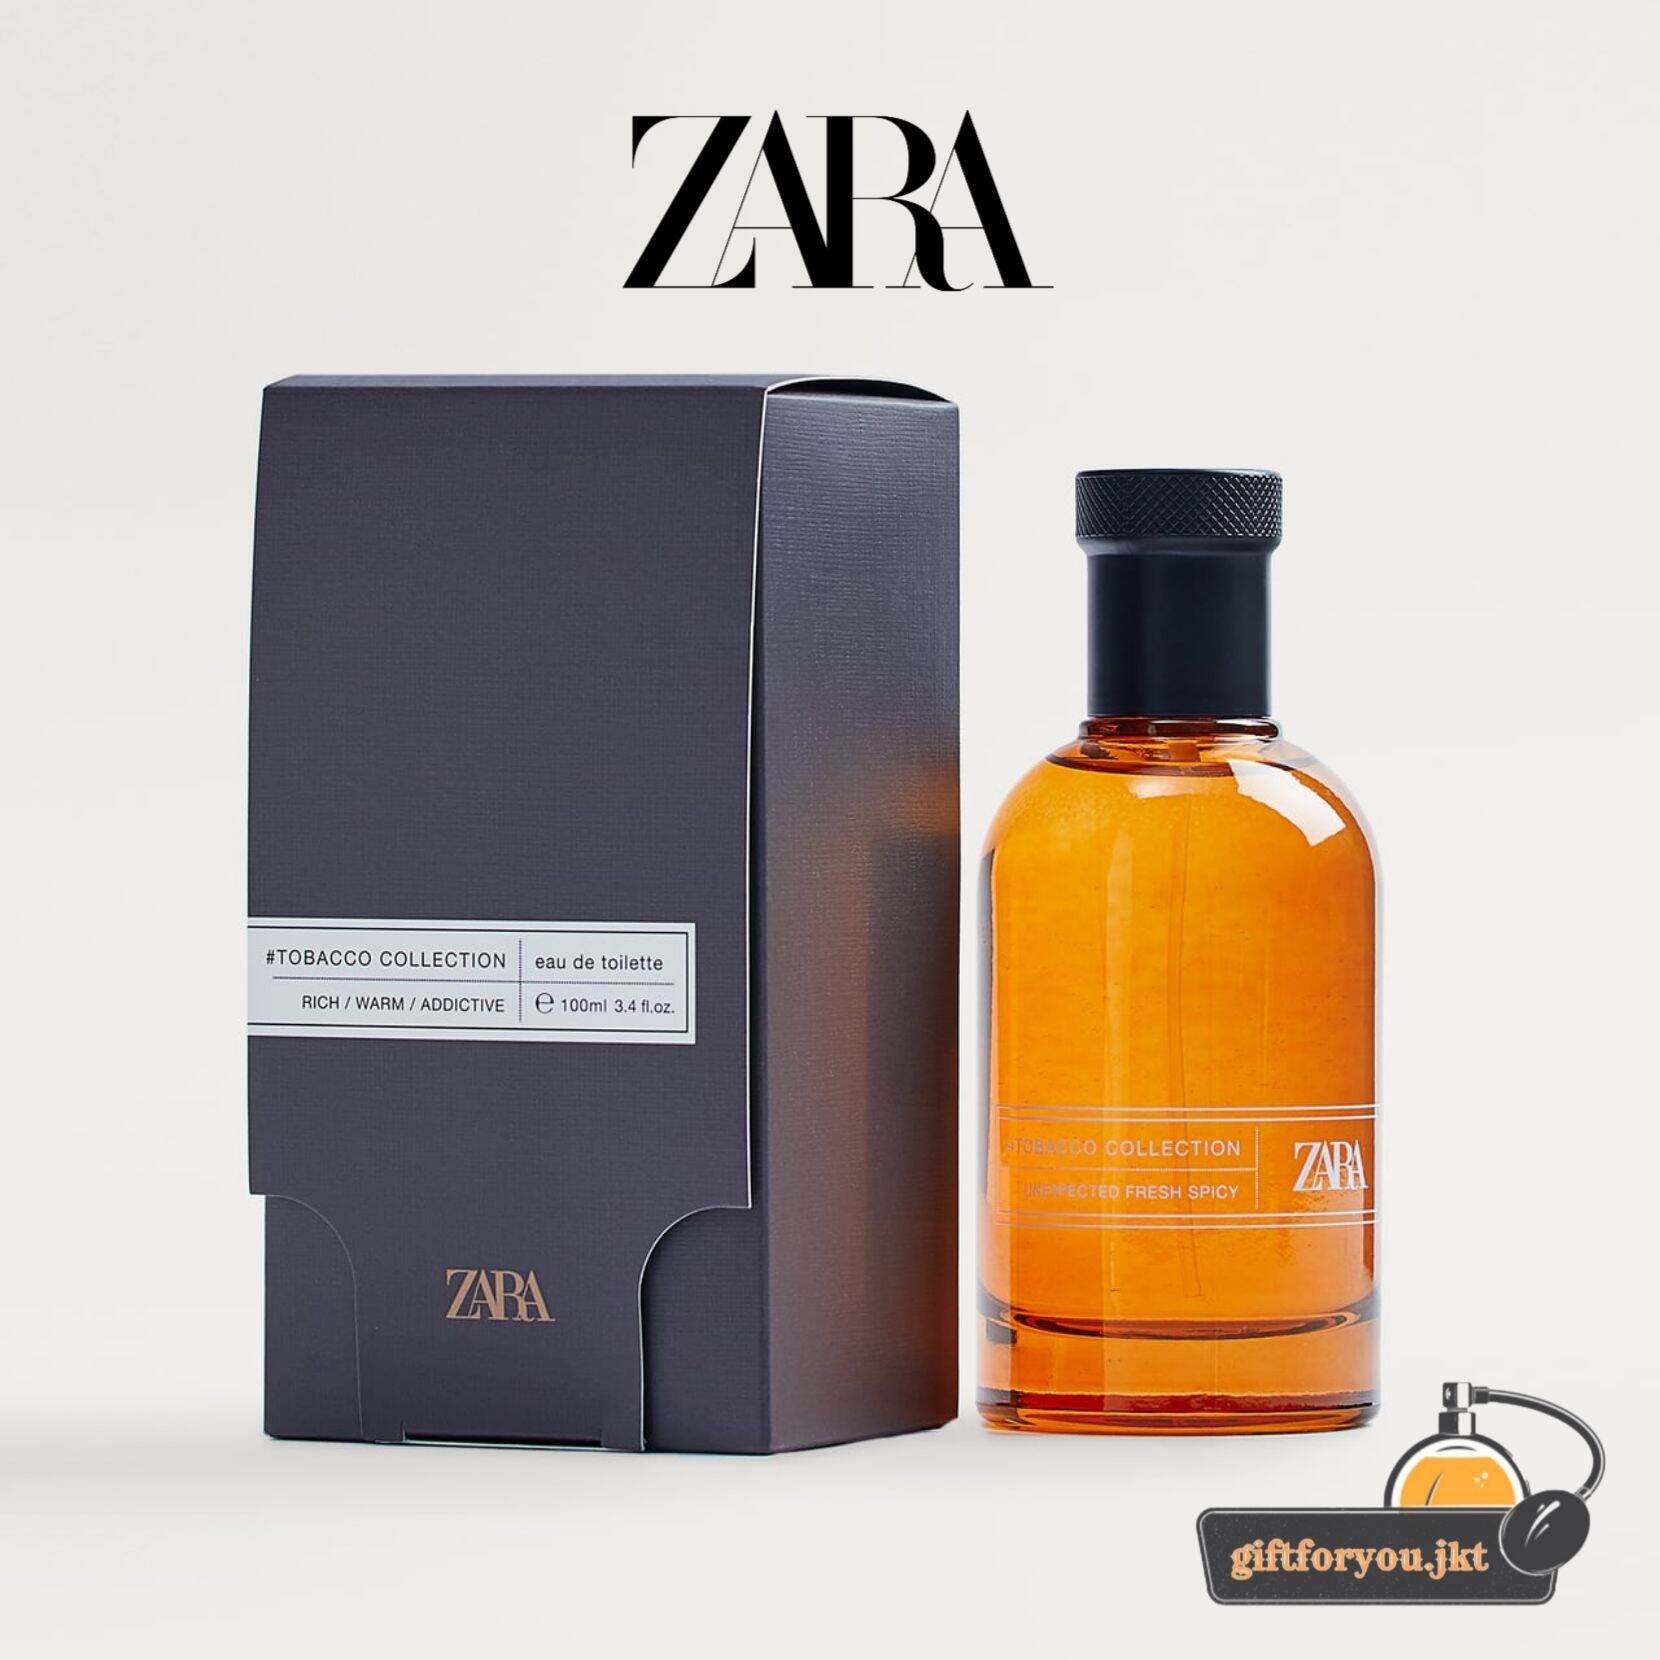 Tobacco collection. Tabaco man Парфюм. Zara Tobacco collection Rich warm addictive. Tobacco collection intense Dark Exclusive (Zara).